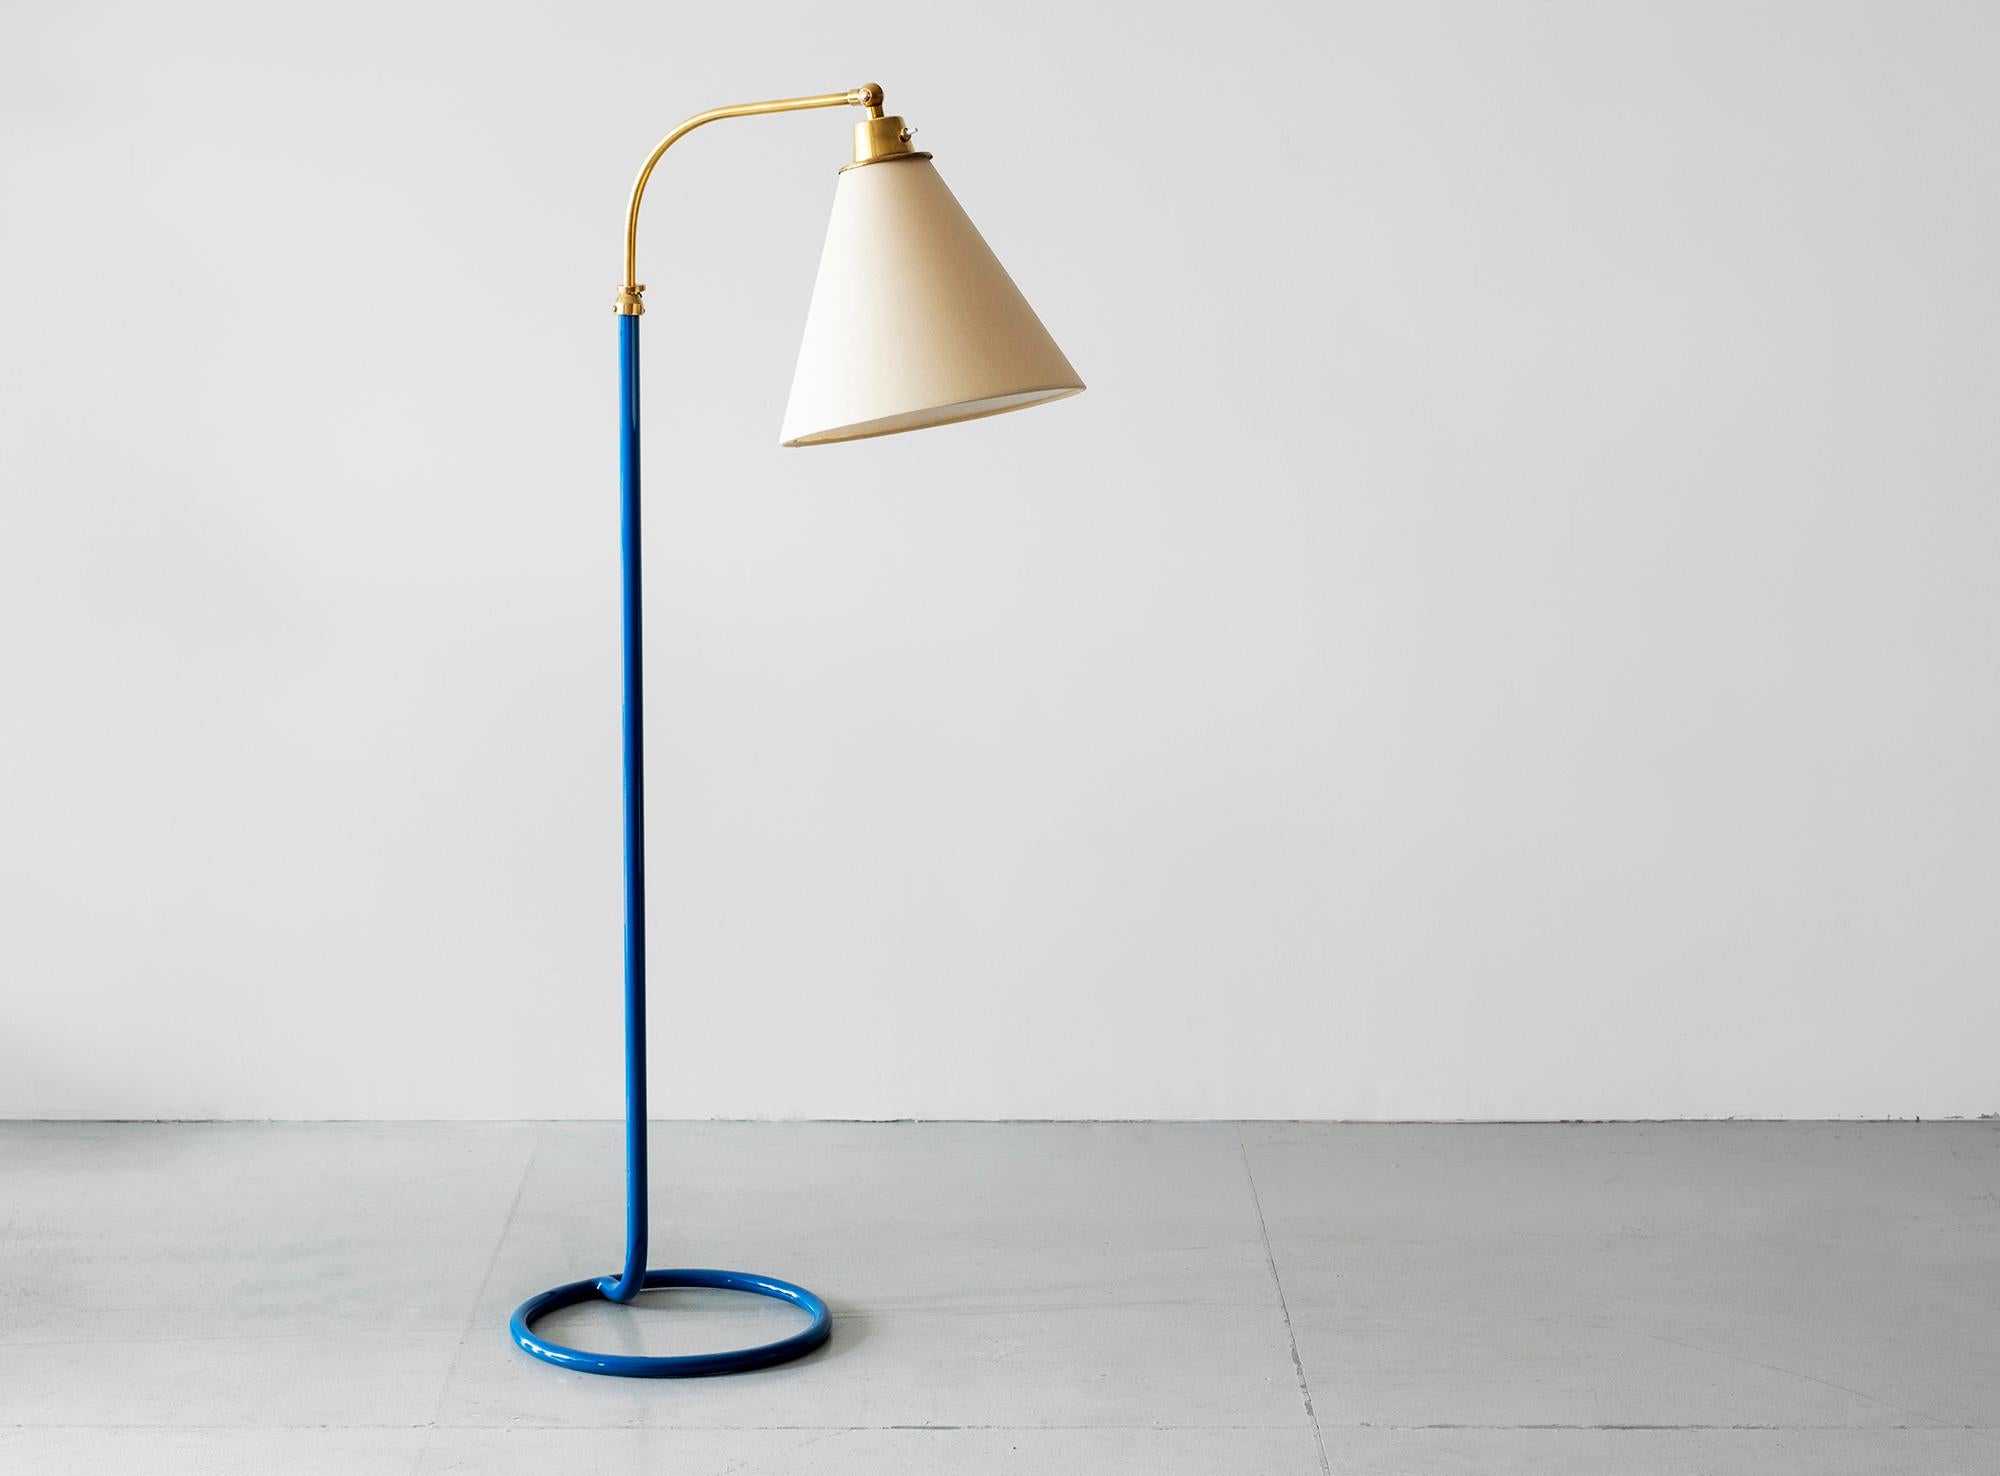 French floor lamp with lacquered blue stem, pivoting brass neck and unique circle base.
Adjustable height.
Newly rewired with new silk shade.